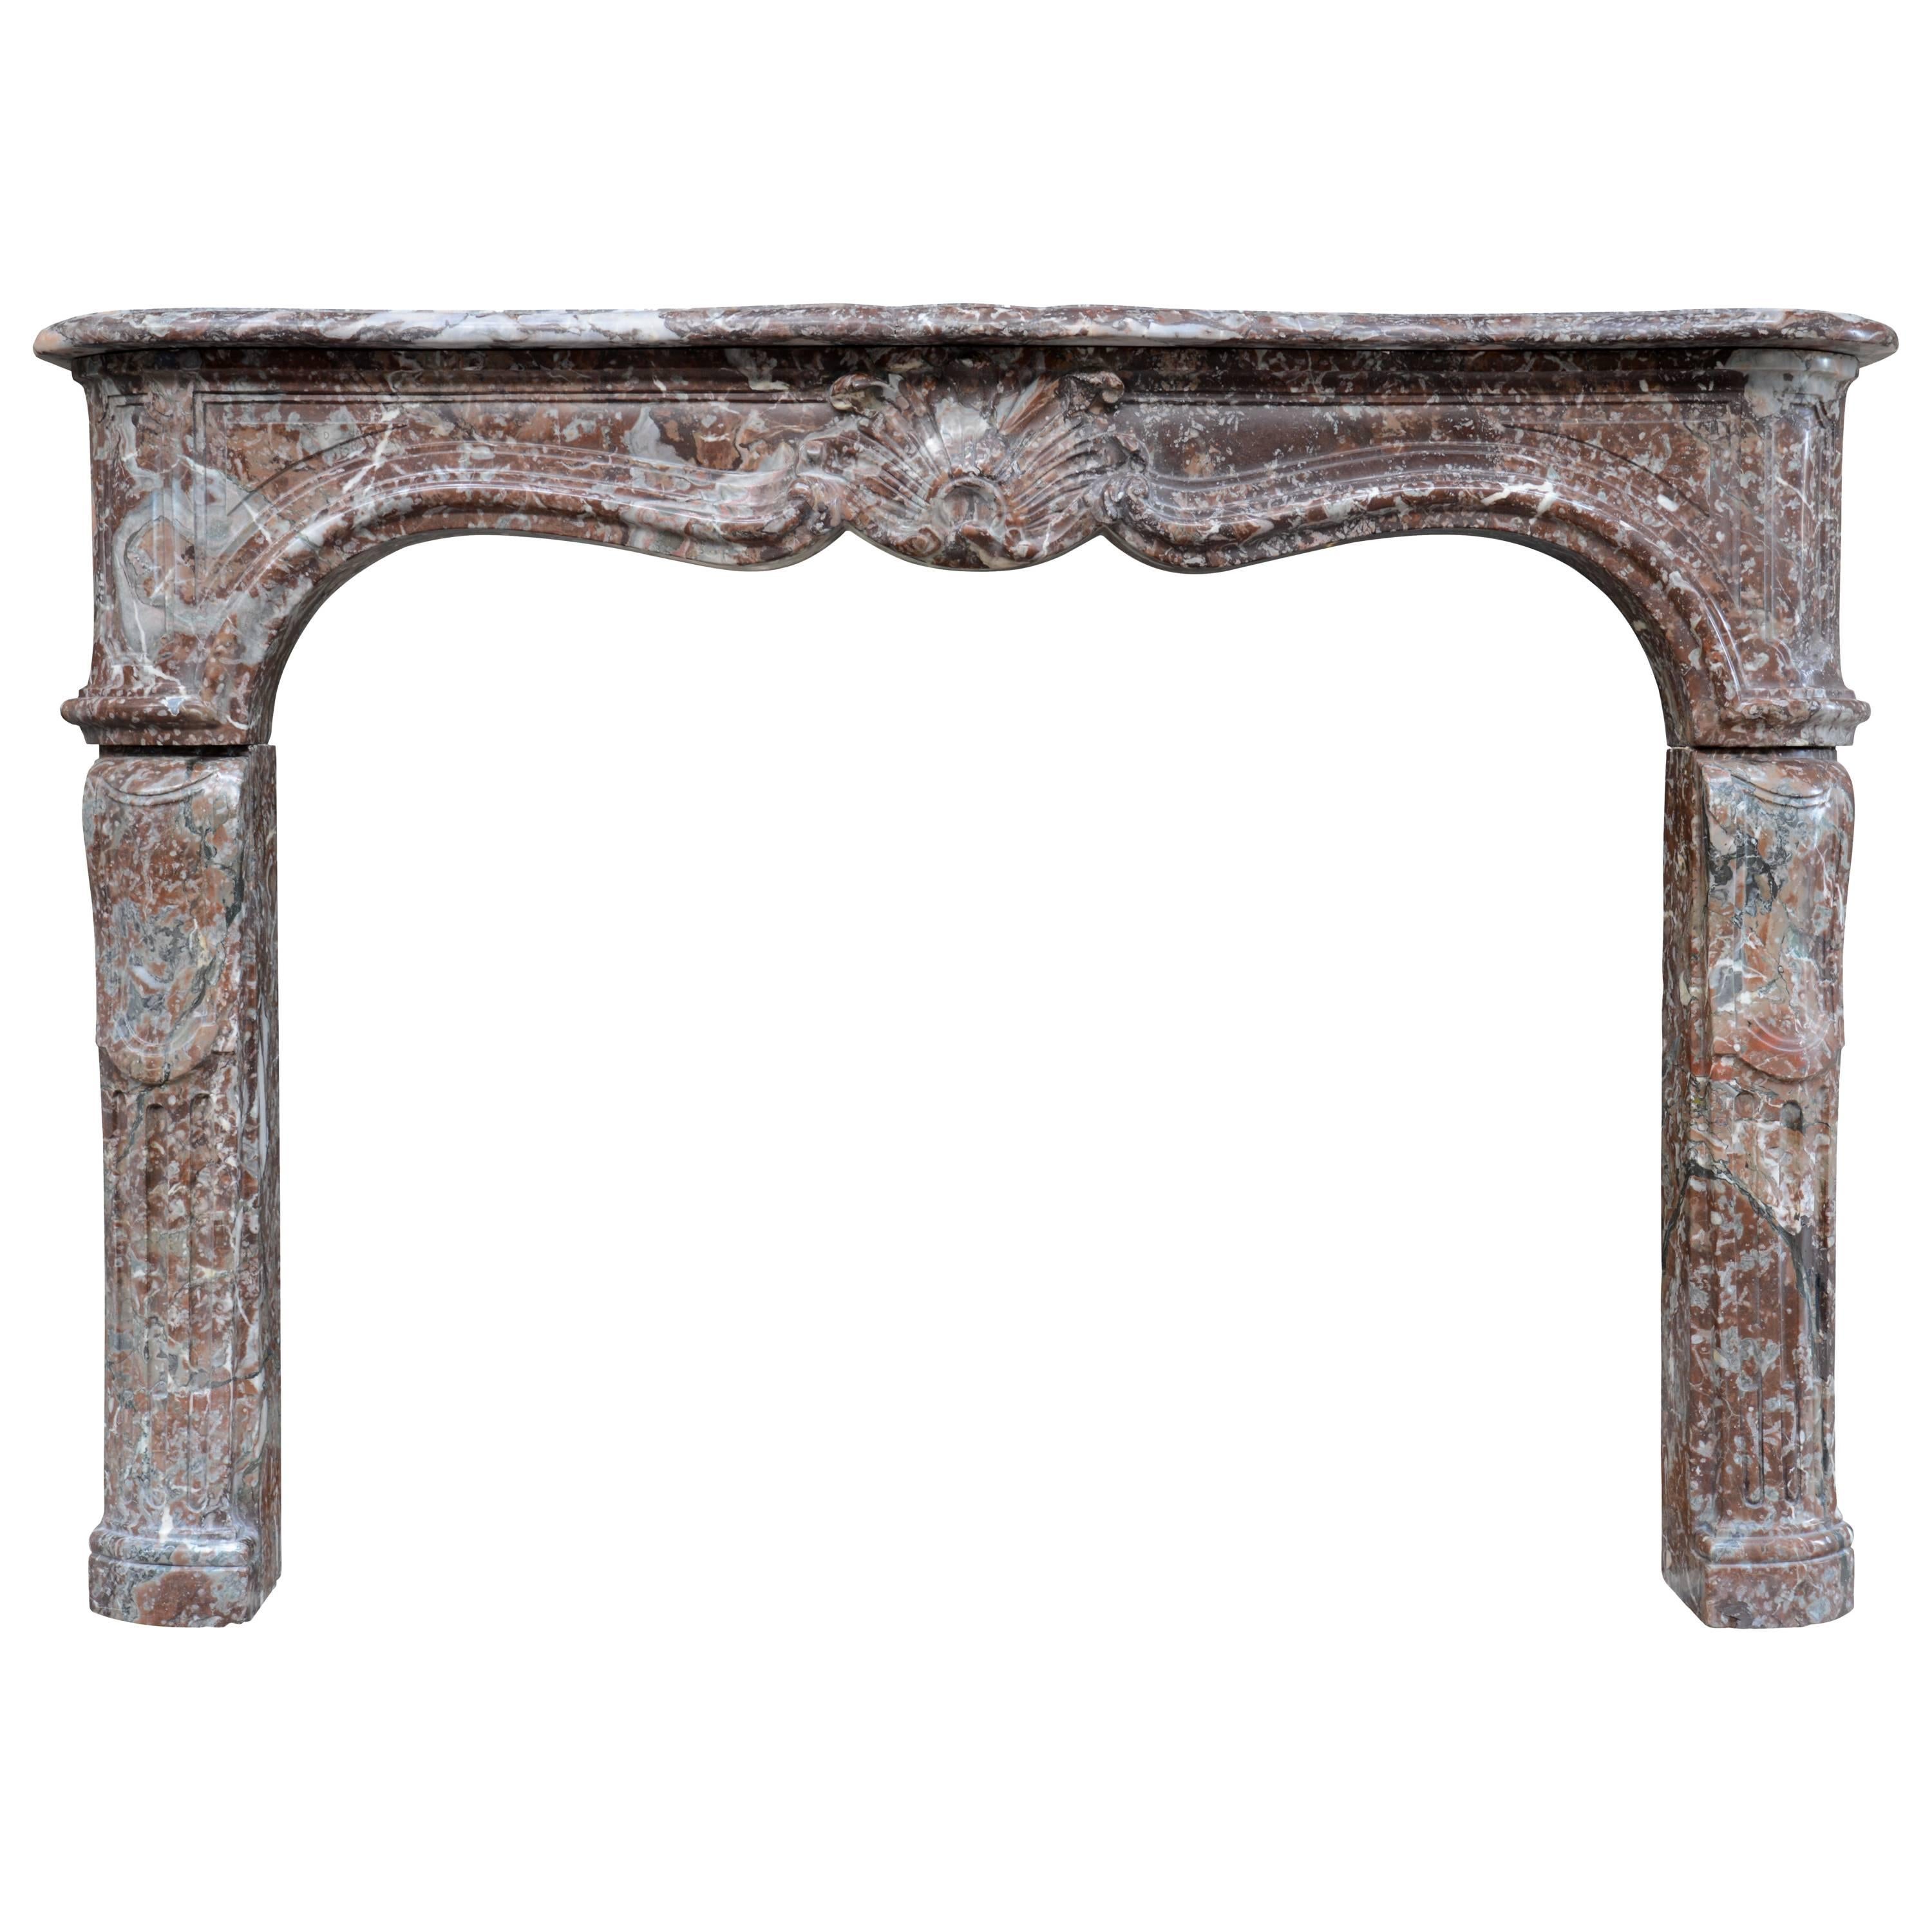 French Louis XV Belgium Rance Marble Fireplace, 18th Century For Sale